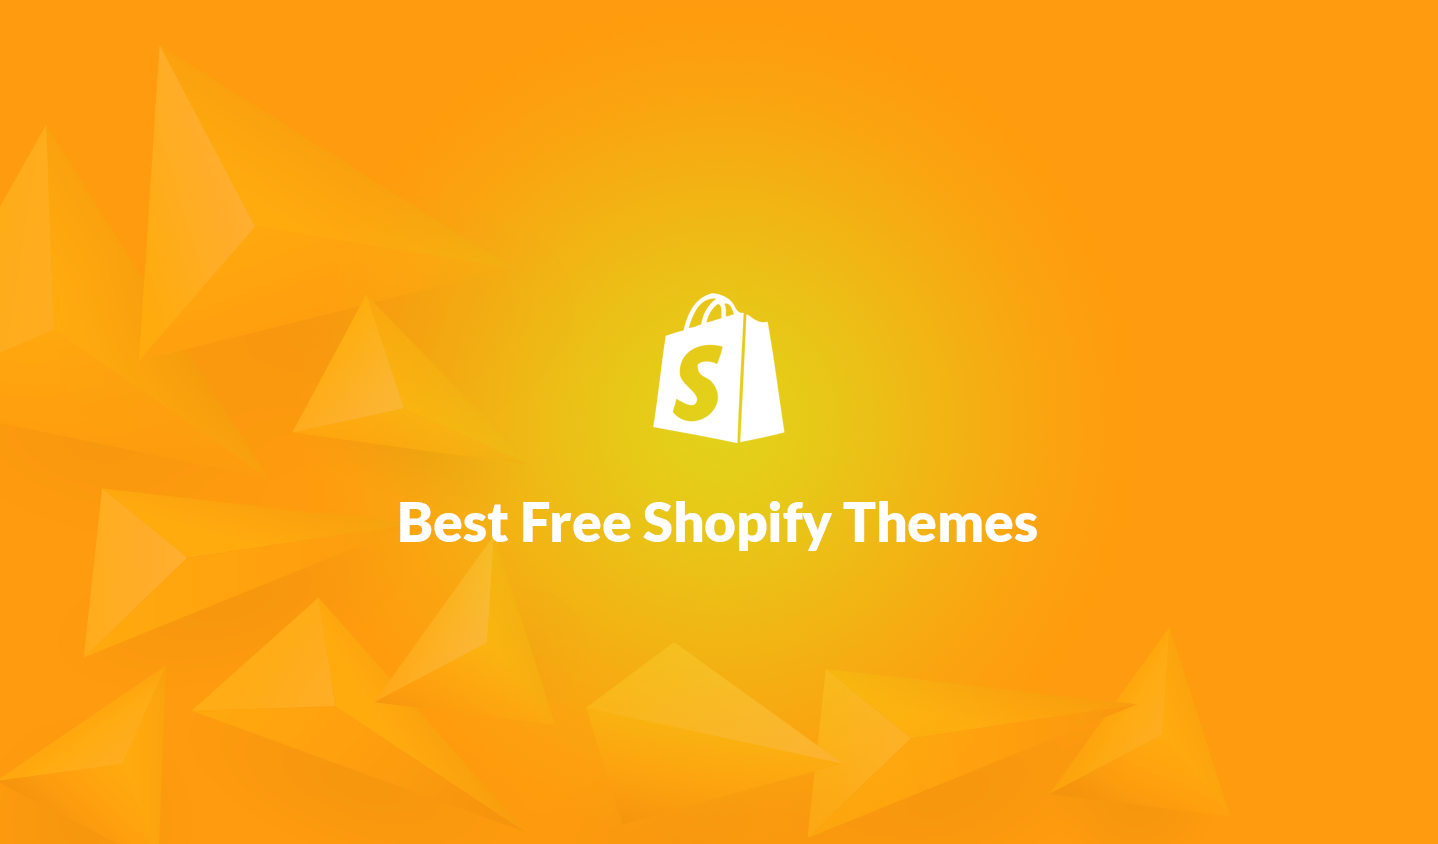 10+ Best Free Shopify Themes for 2020 (Responsive & Mobile-Ready)